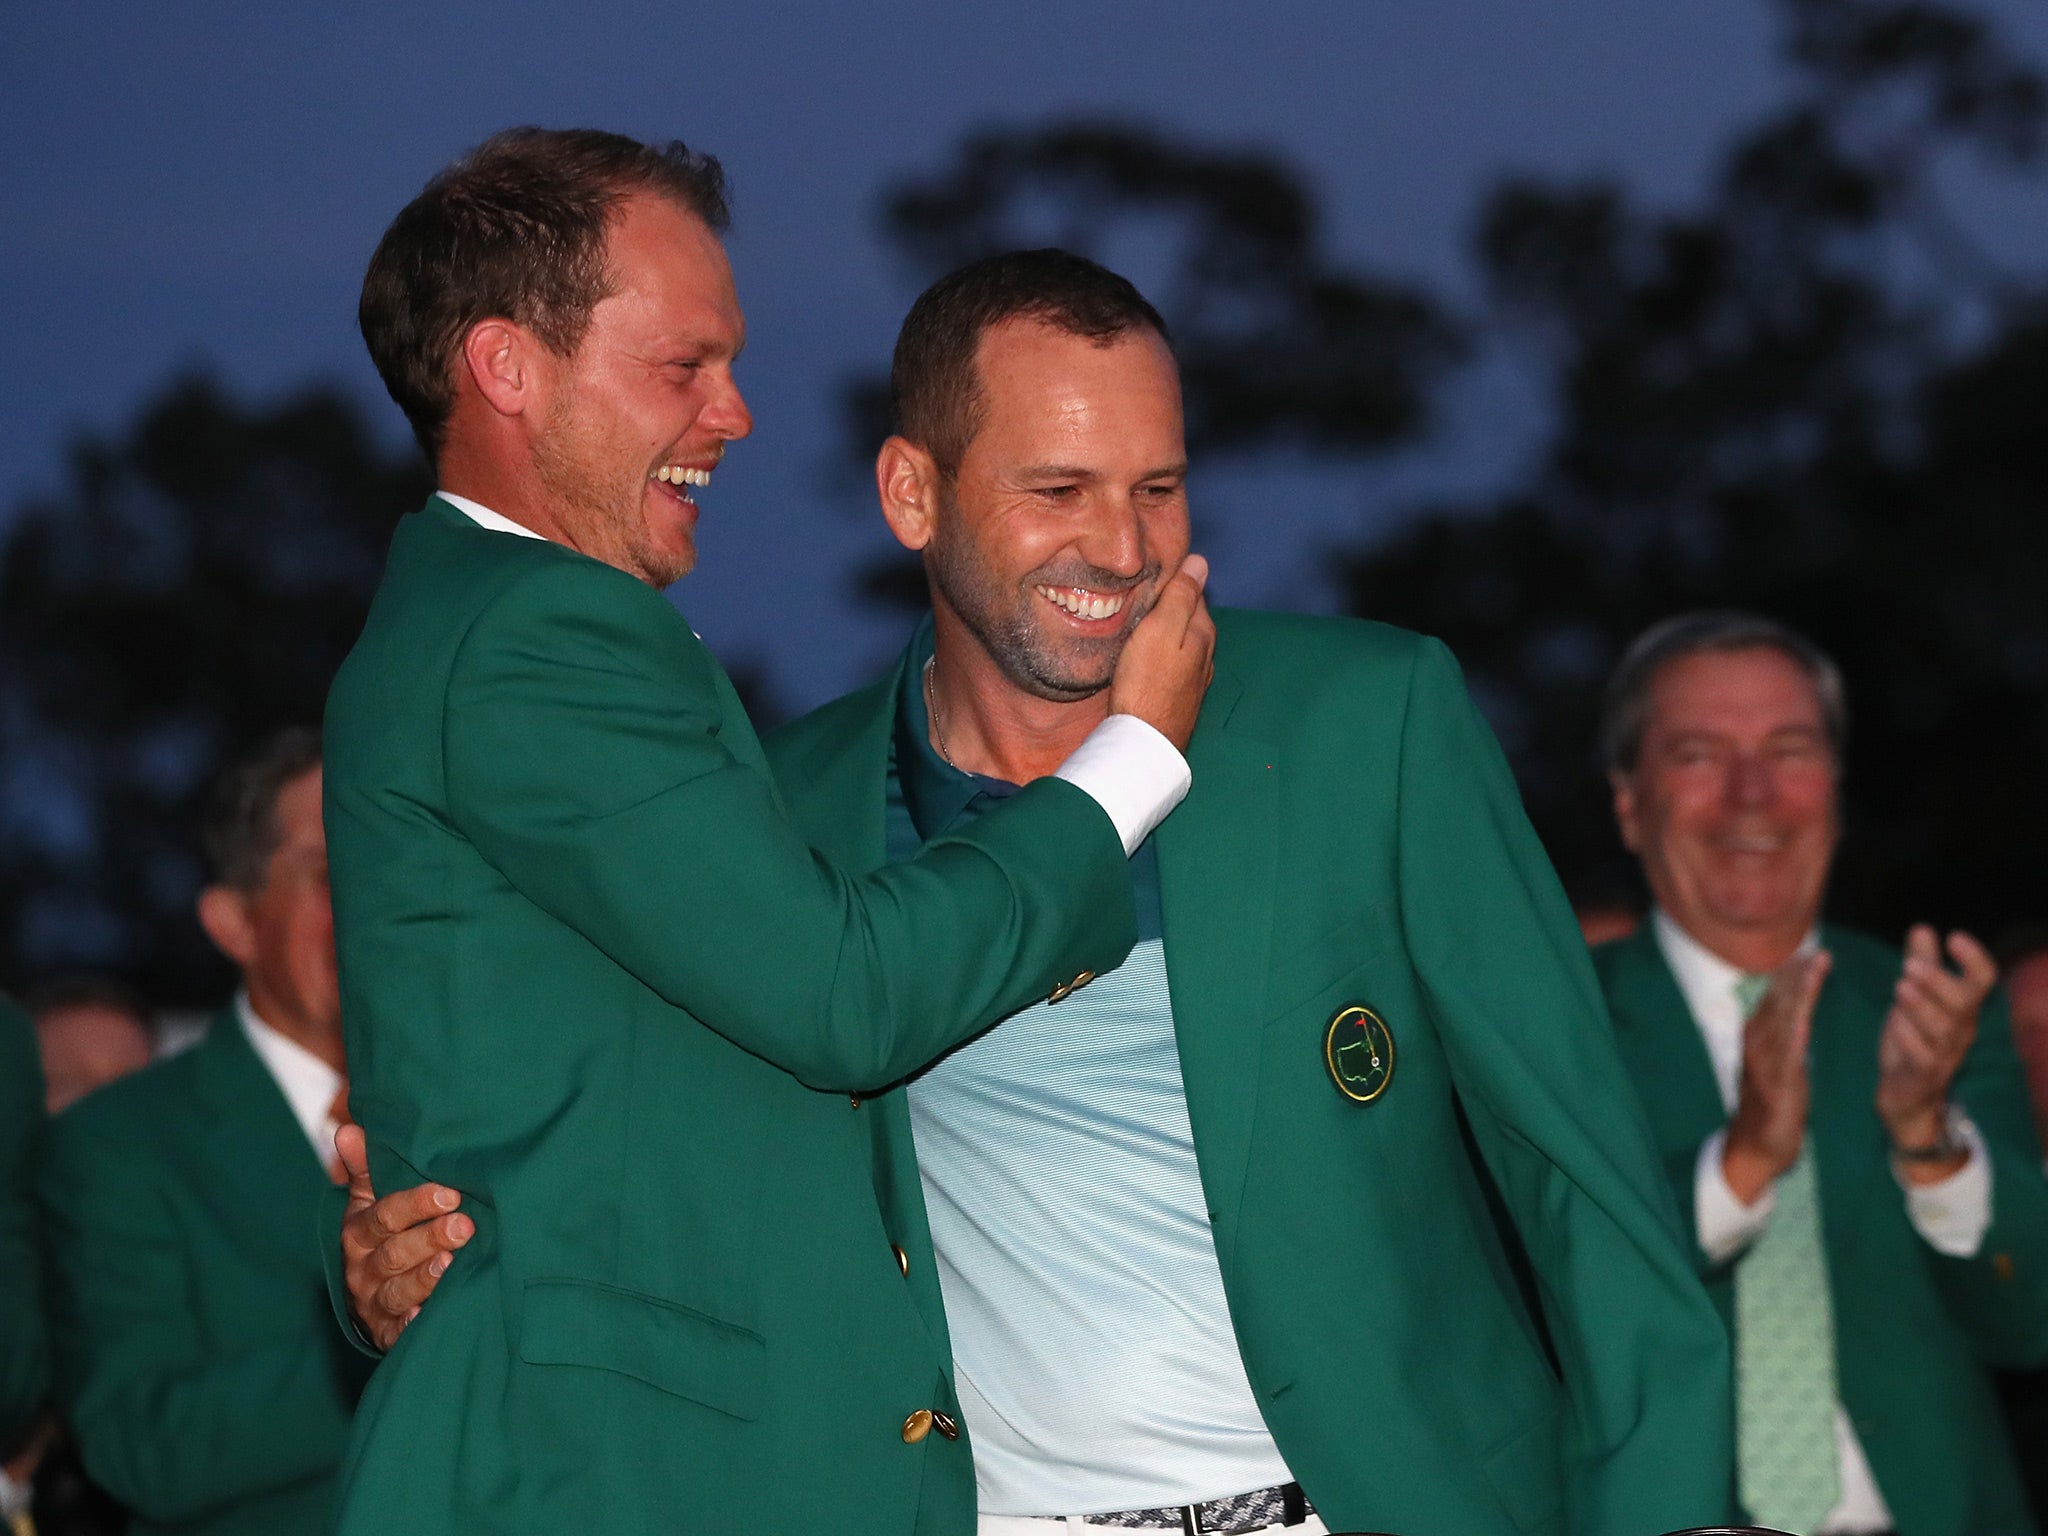 McIlroy hasn't played since the Masters last month where Sergio Garcia picked up the green jacket